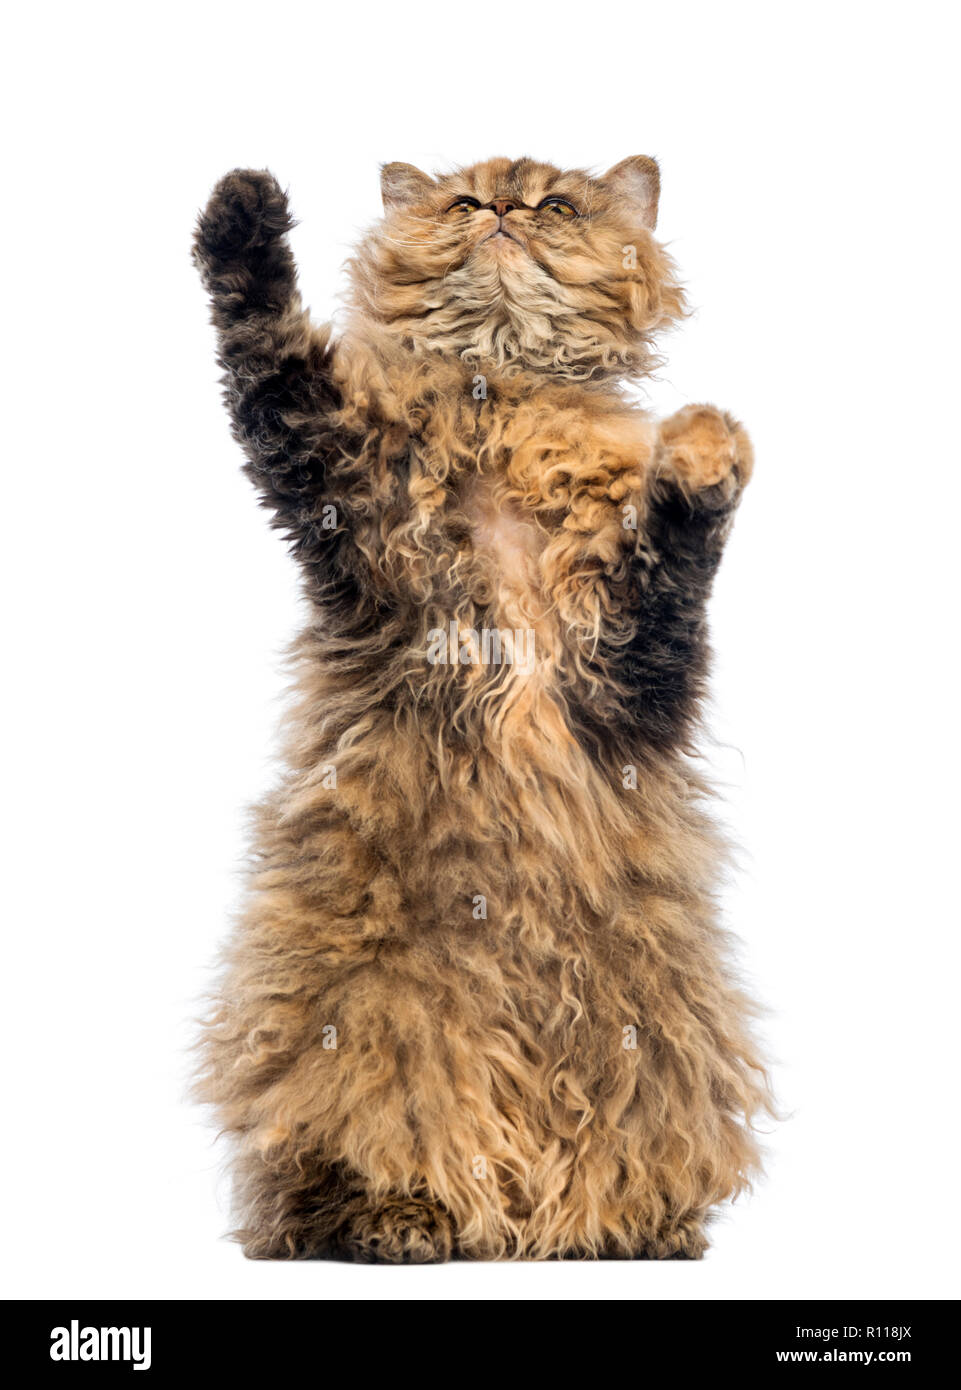 Selkirk Rex, 5 months old, standing on hind legs and reaching against white background Stock Photo